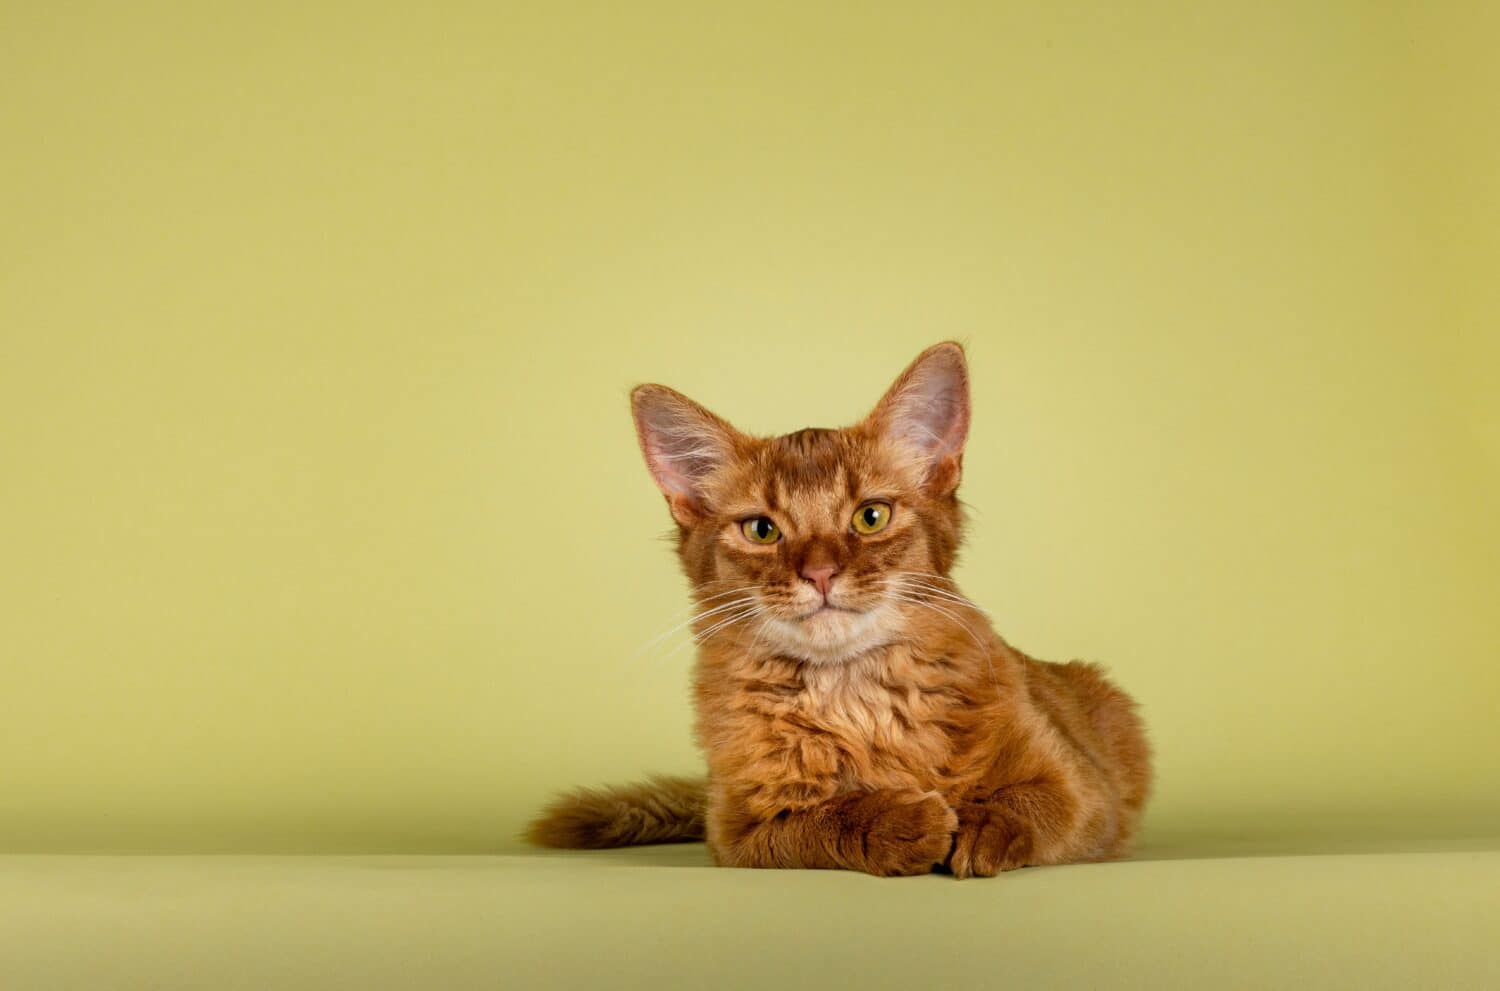 Cute sorrel Somali cat kitten, laying down facing front. Looking towards camera. Isolated on a soft green background.